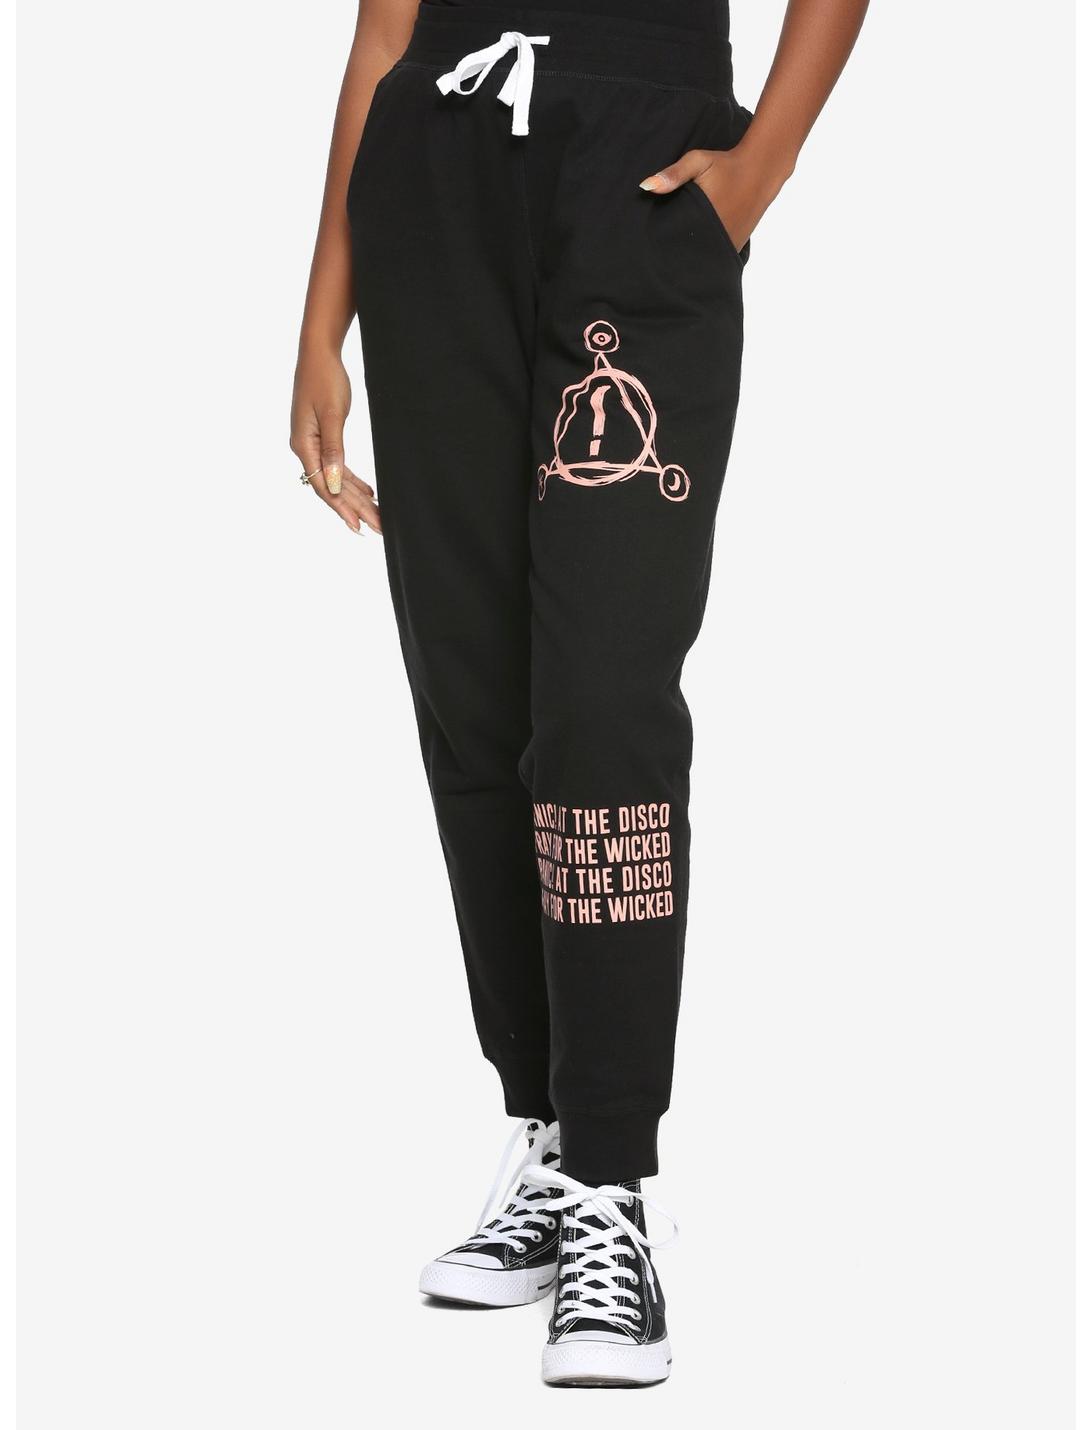 Panic! At The Disco Pray For The Wicked Pink Logo Girls Jogger Pants, BLACK, hi-res